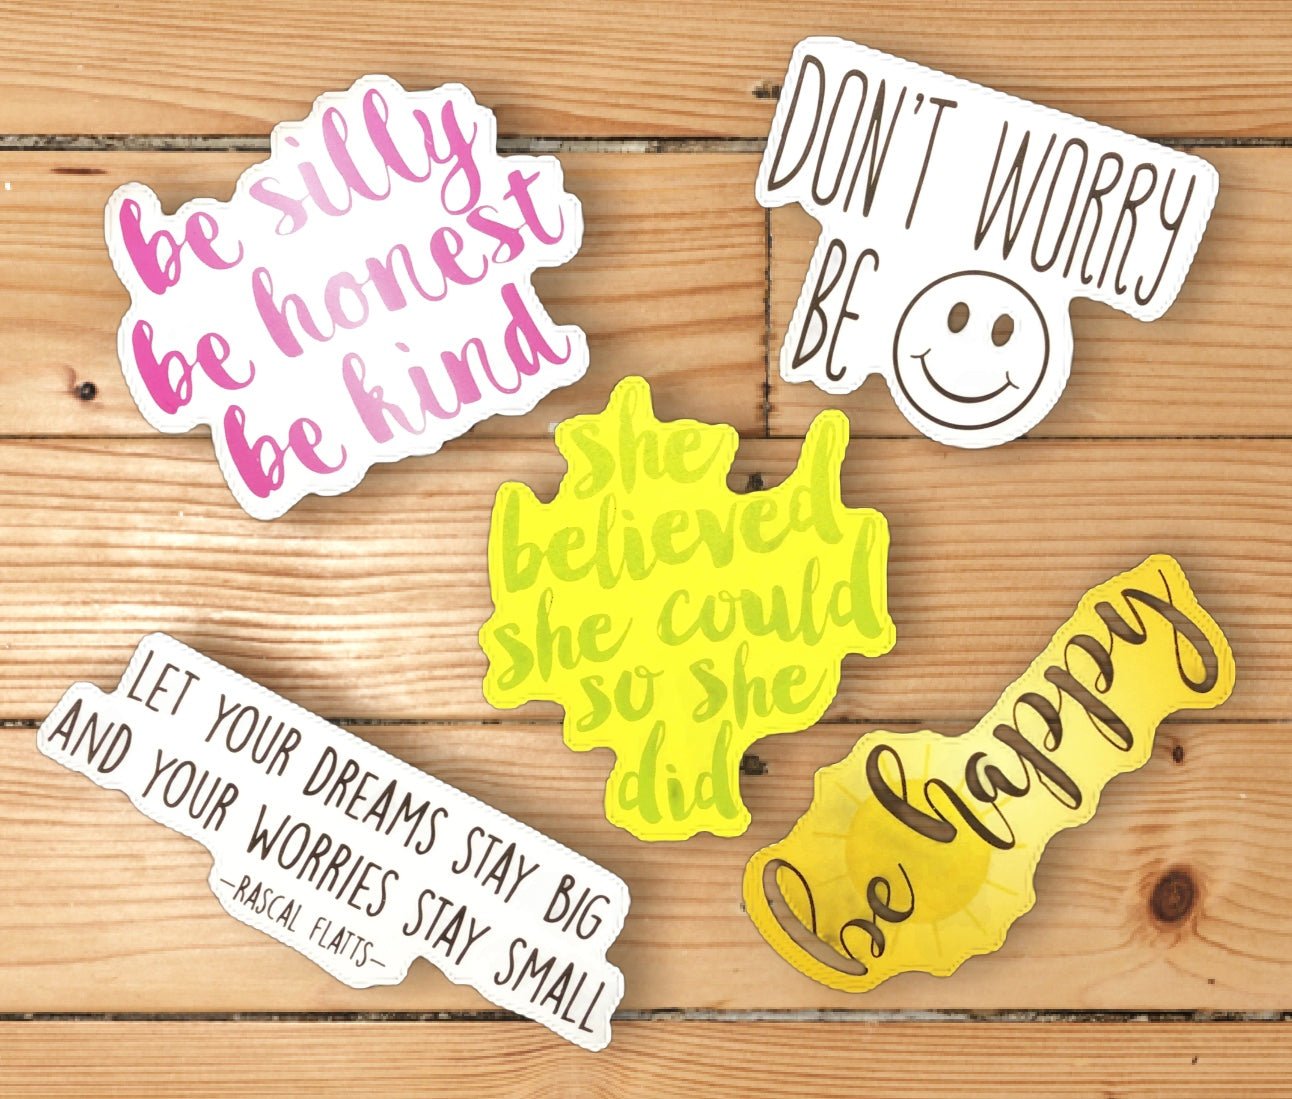 Inspirational Messages Stickers